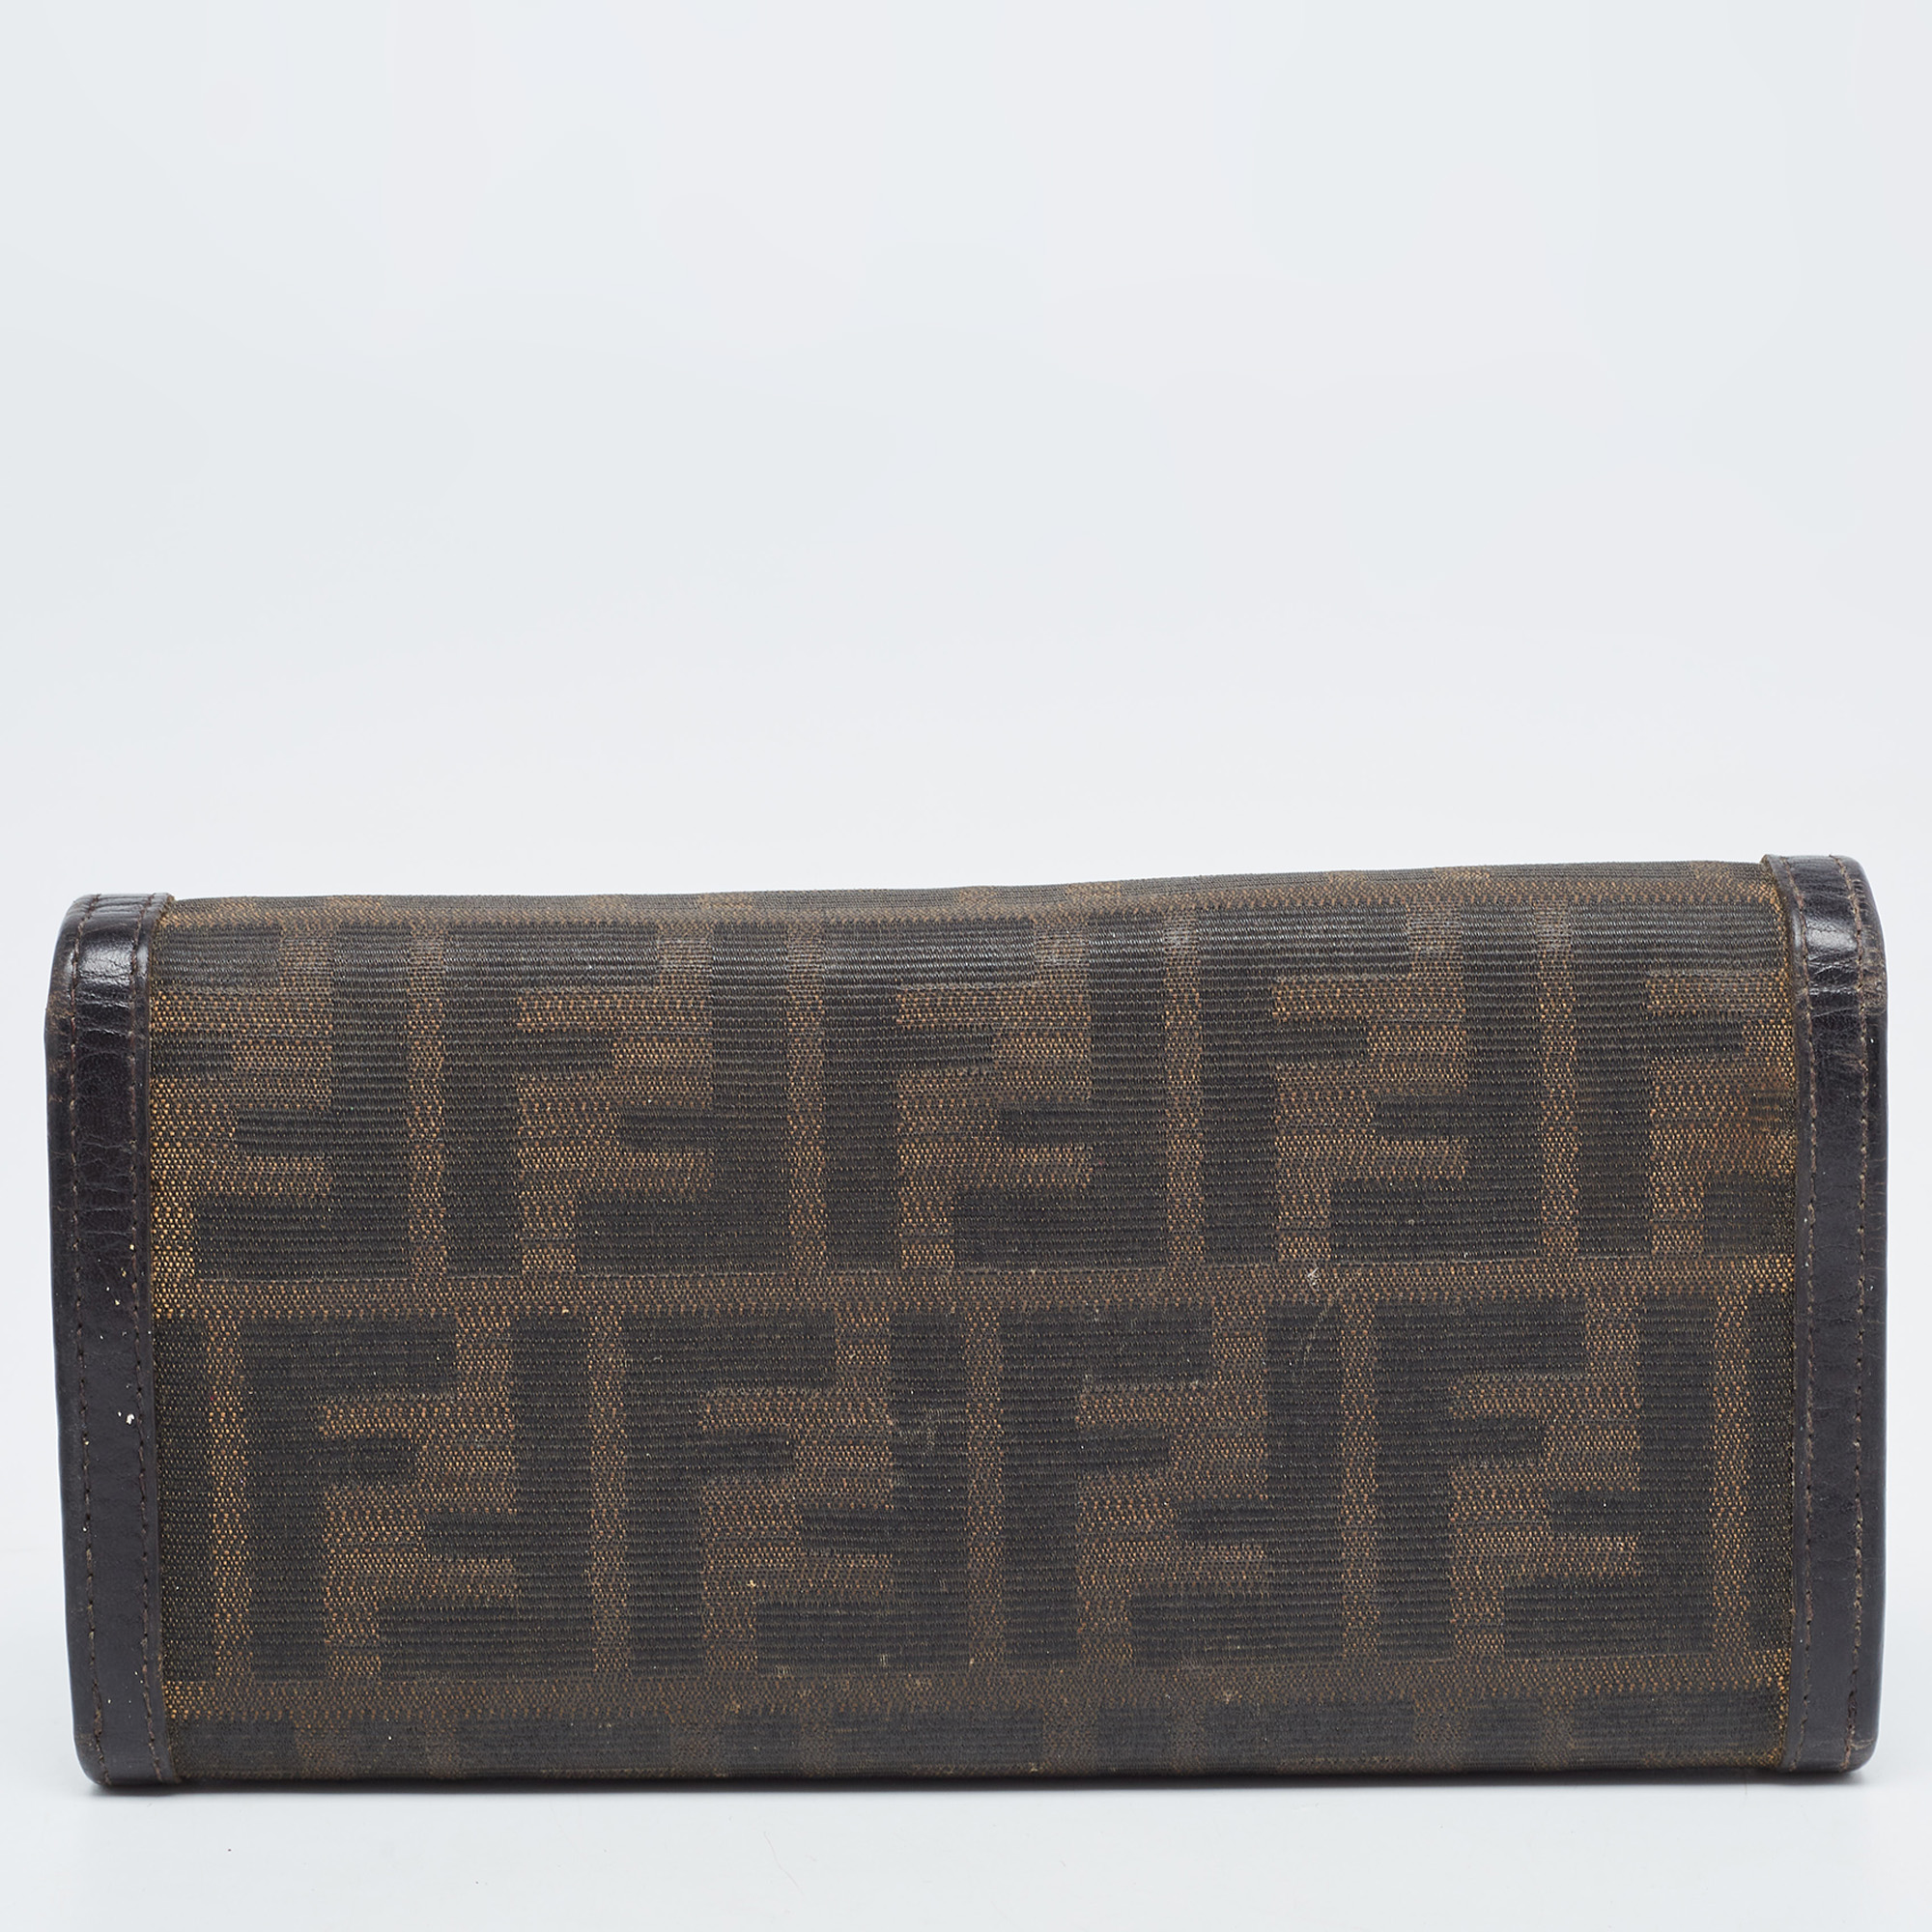 Fendi Dark Brown/Tobacco Zucca Canvas And Leather Trifold Continental Wallet